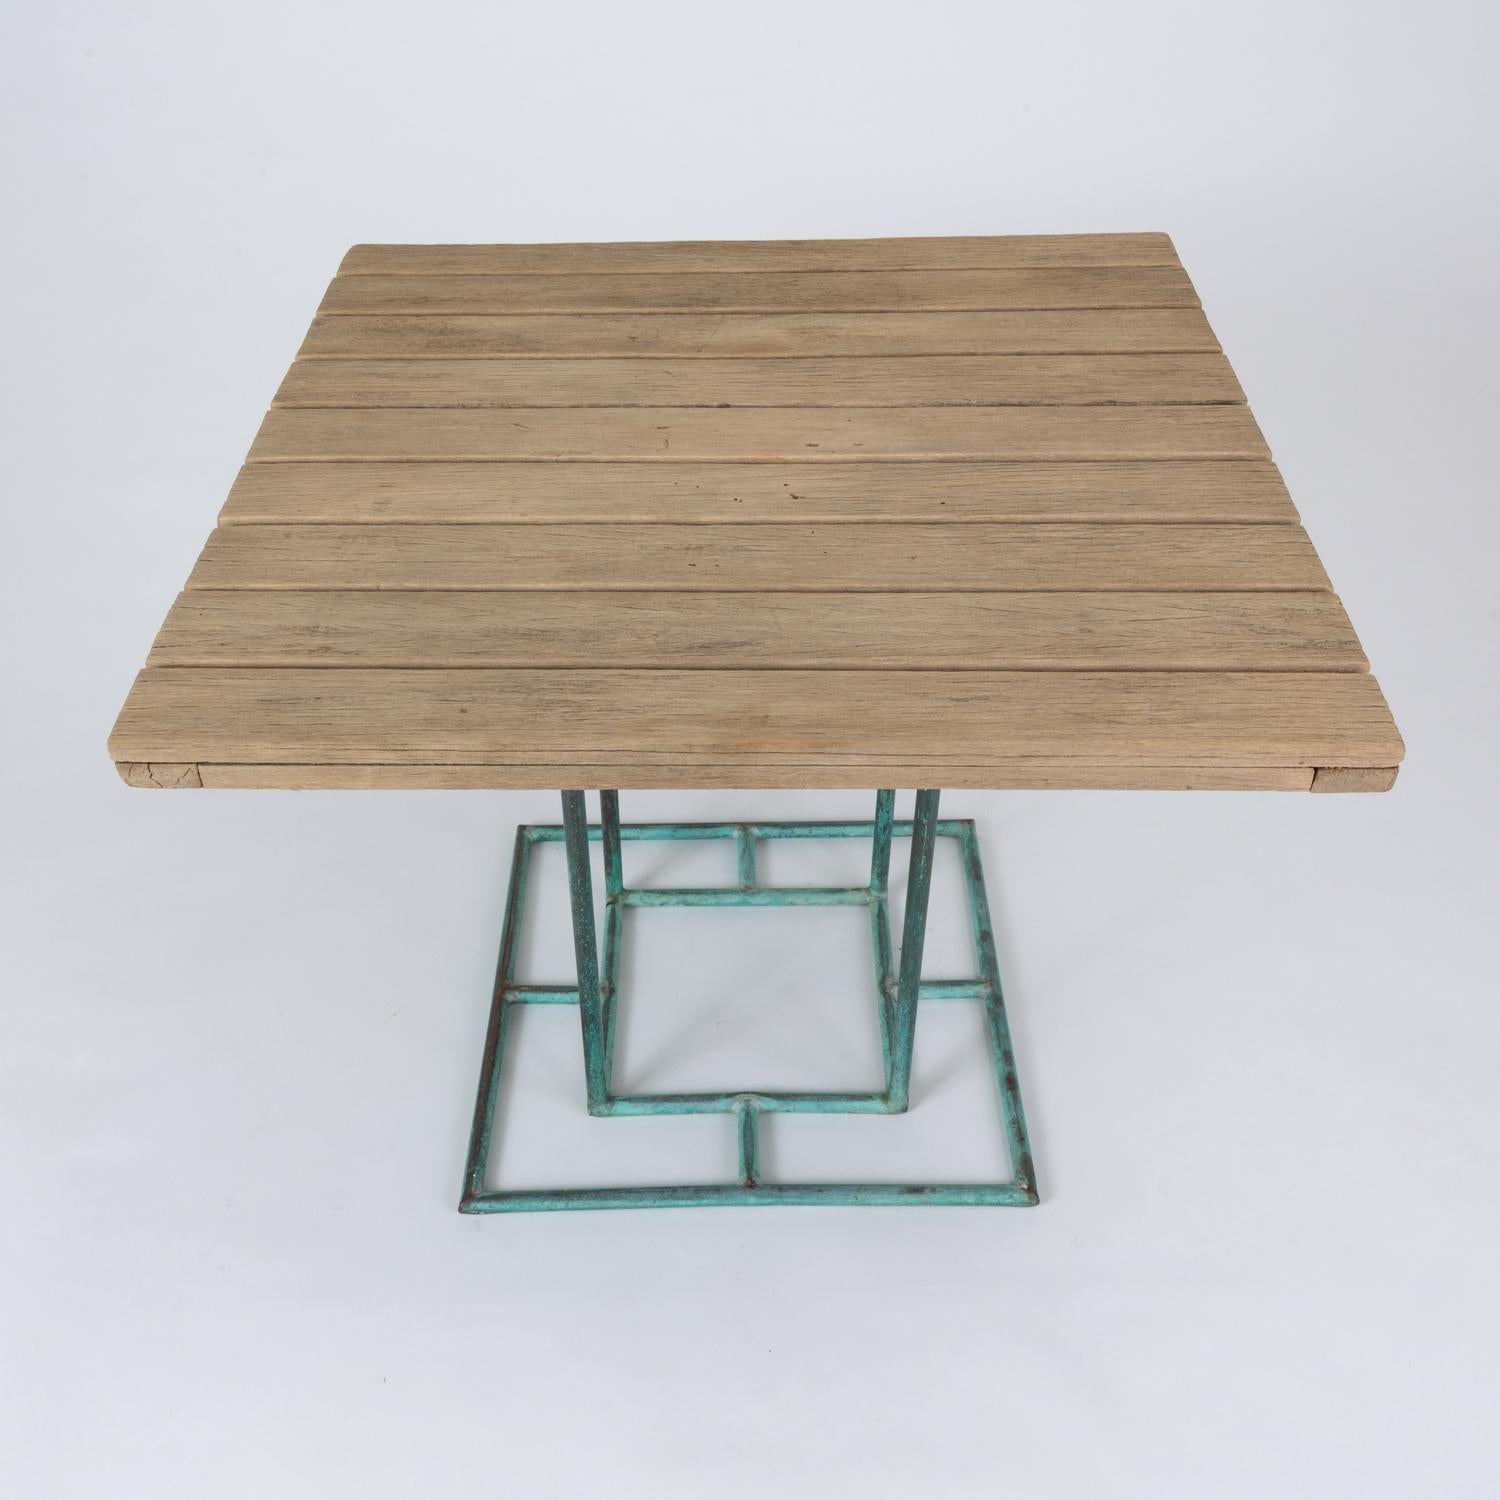 Bronze Patio Dining Table with Square Wooden Top by Walter Lamb for Brown Jordan 4